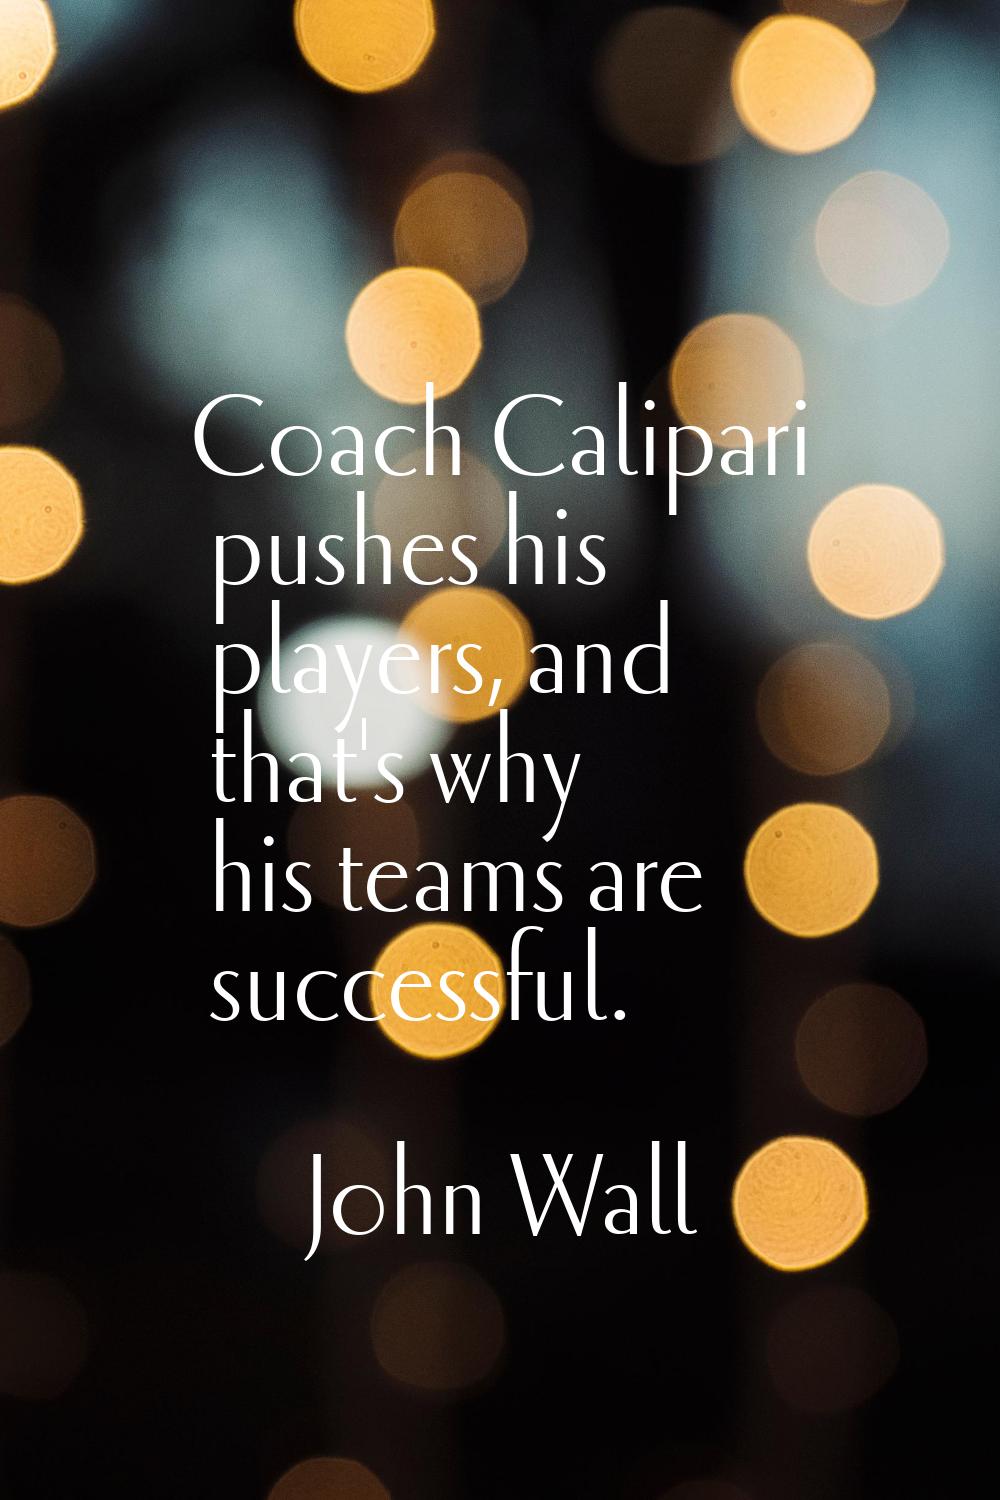 Coach Calipari pushes his players, and that's why his teams are successful.